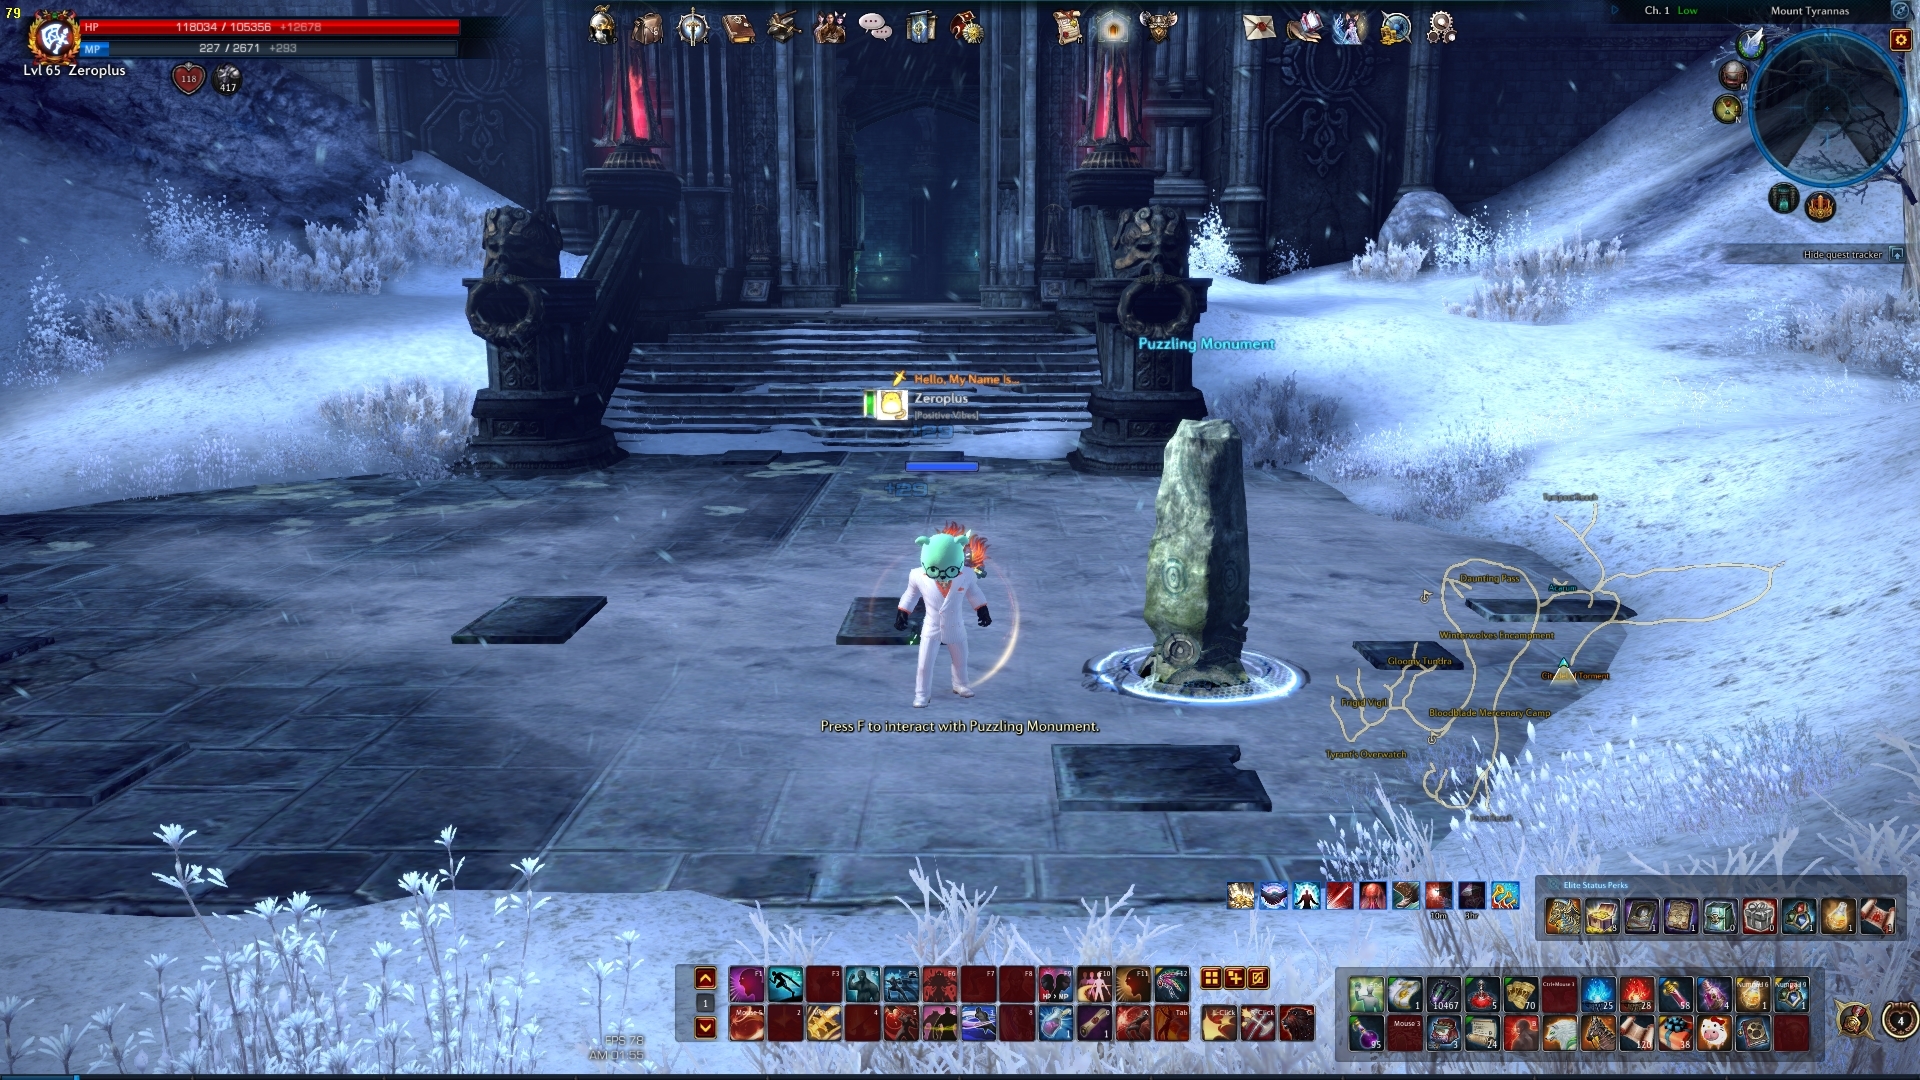 tera found a puzzling monument eldritch academy